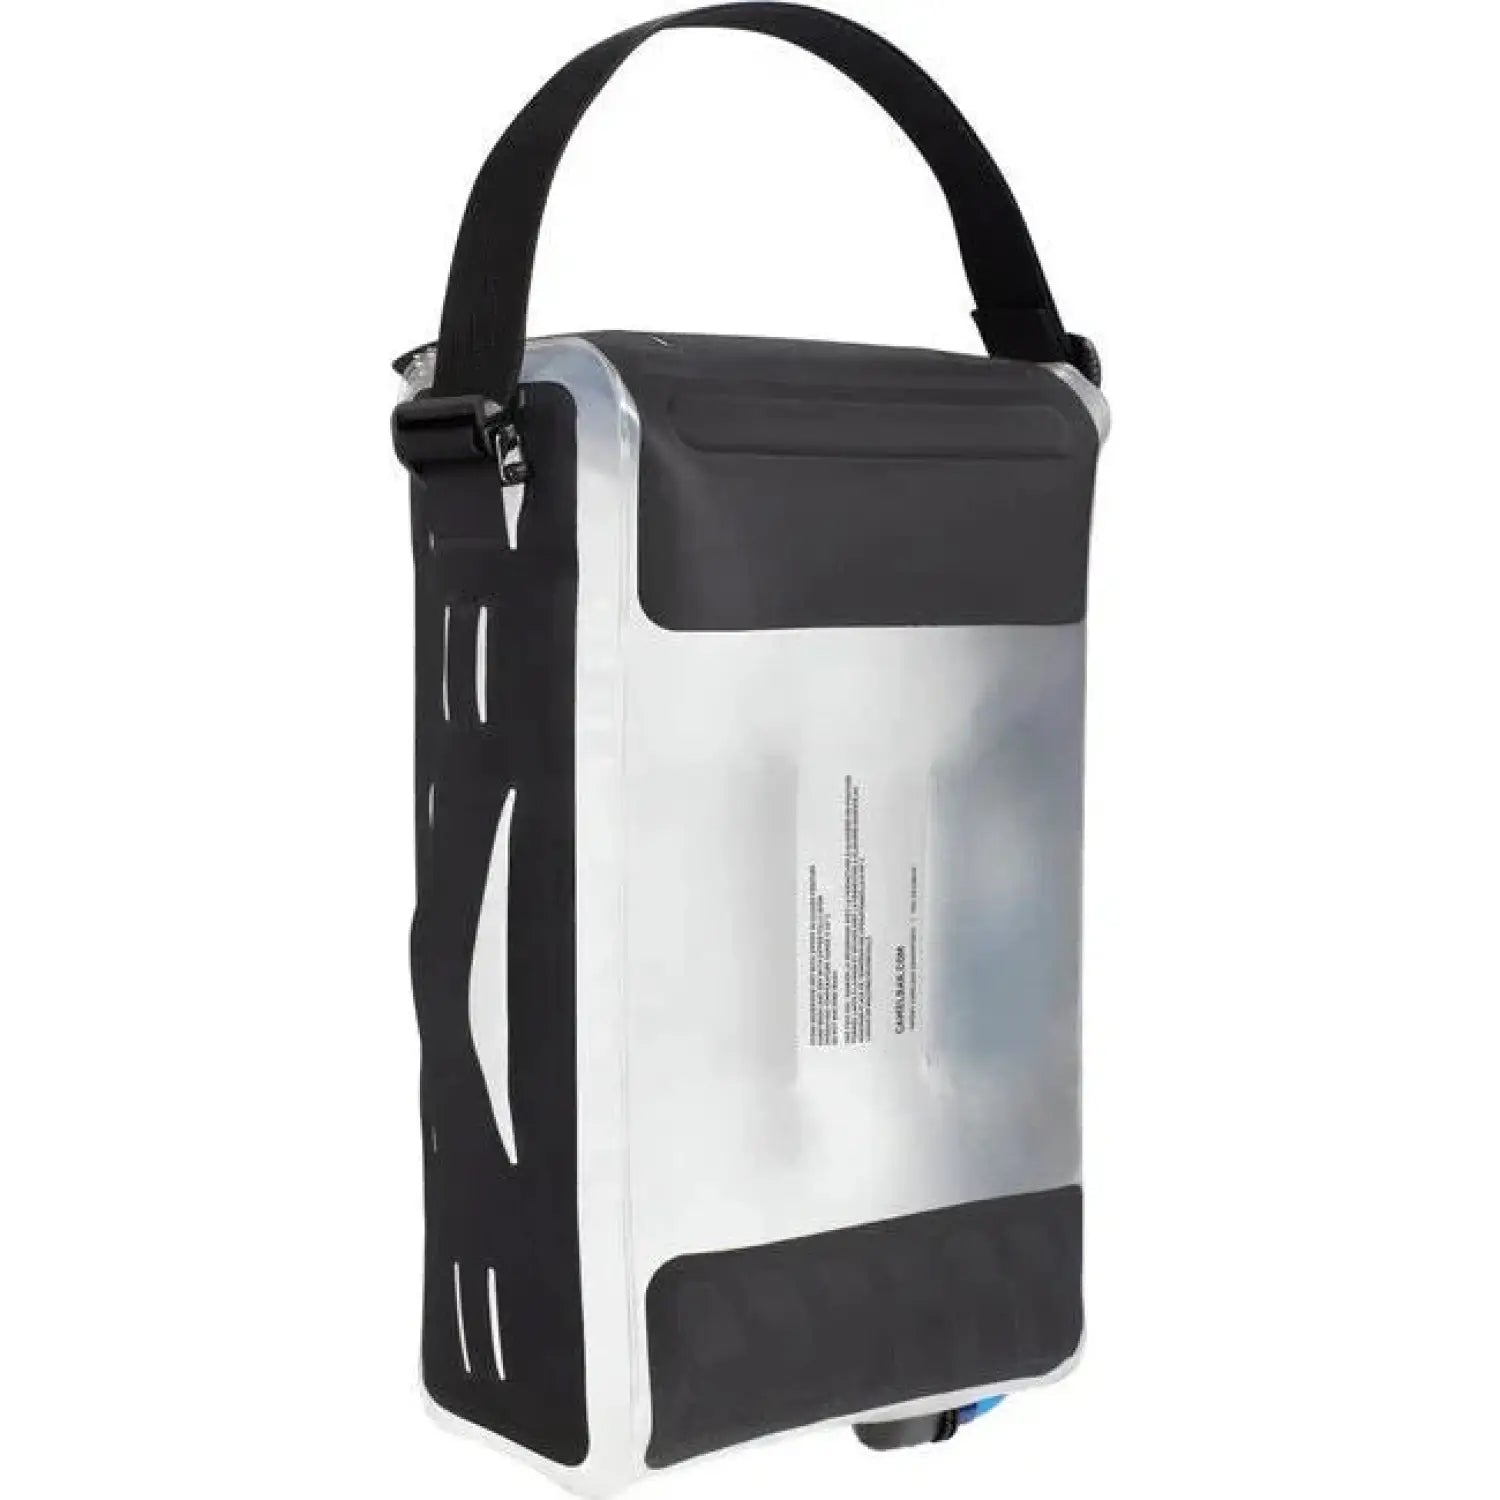 CamelBak Fusion™ 10L Group Reservoir with TRU® Zip Waterproof Zipper, Clear, back and side view